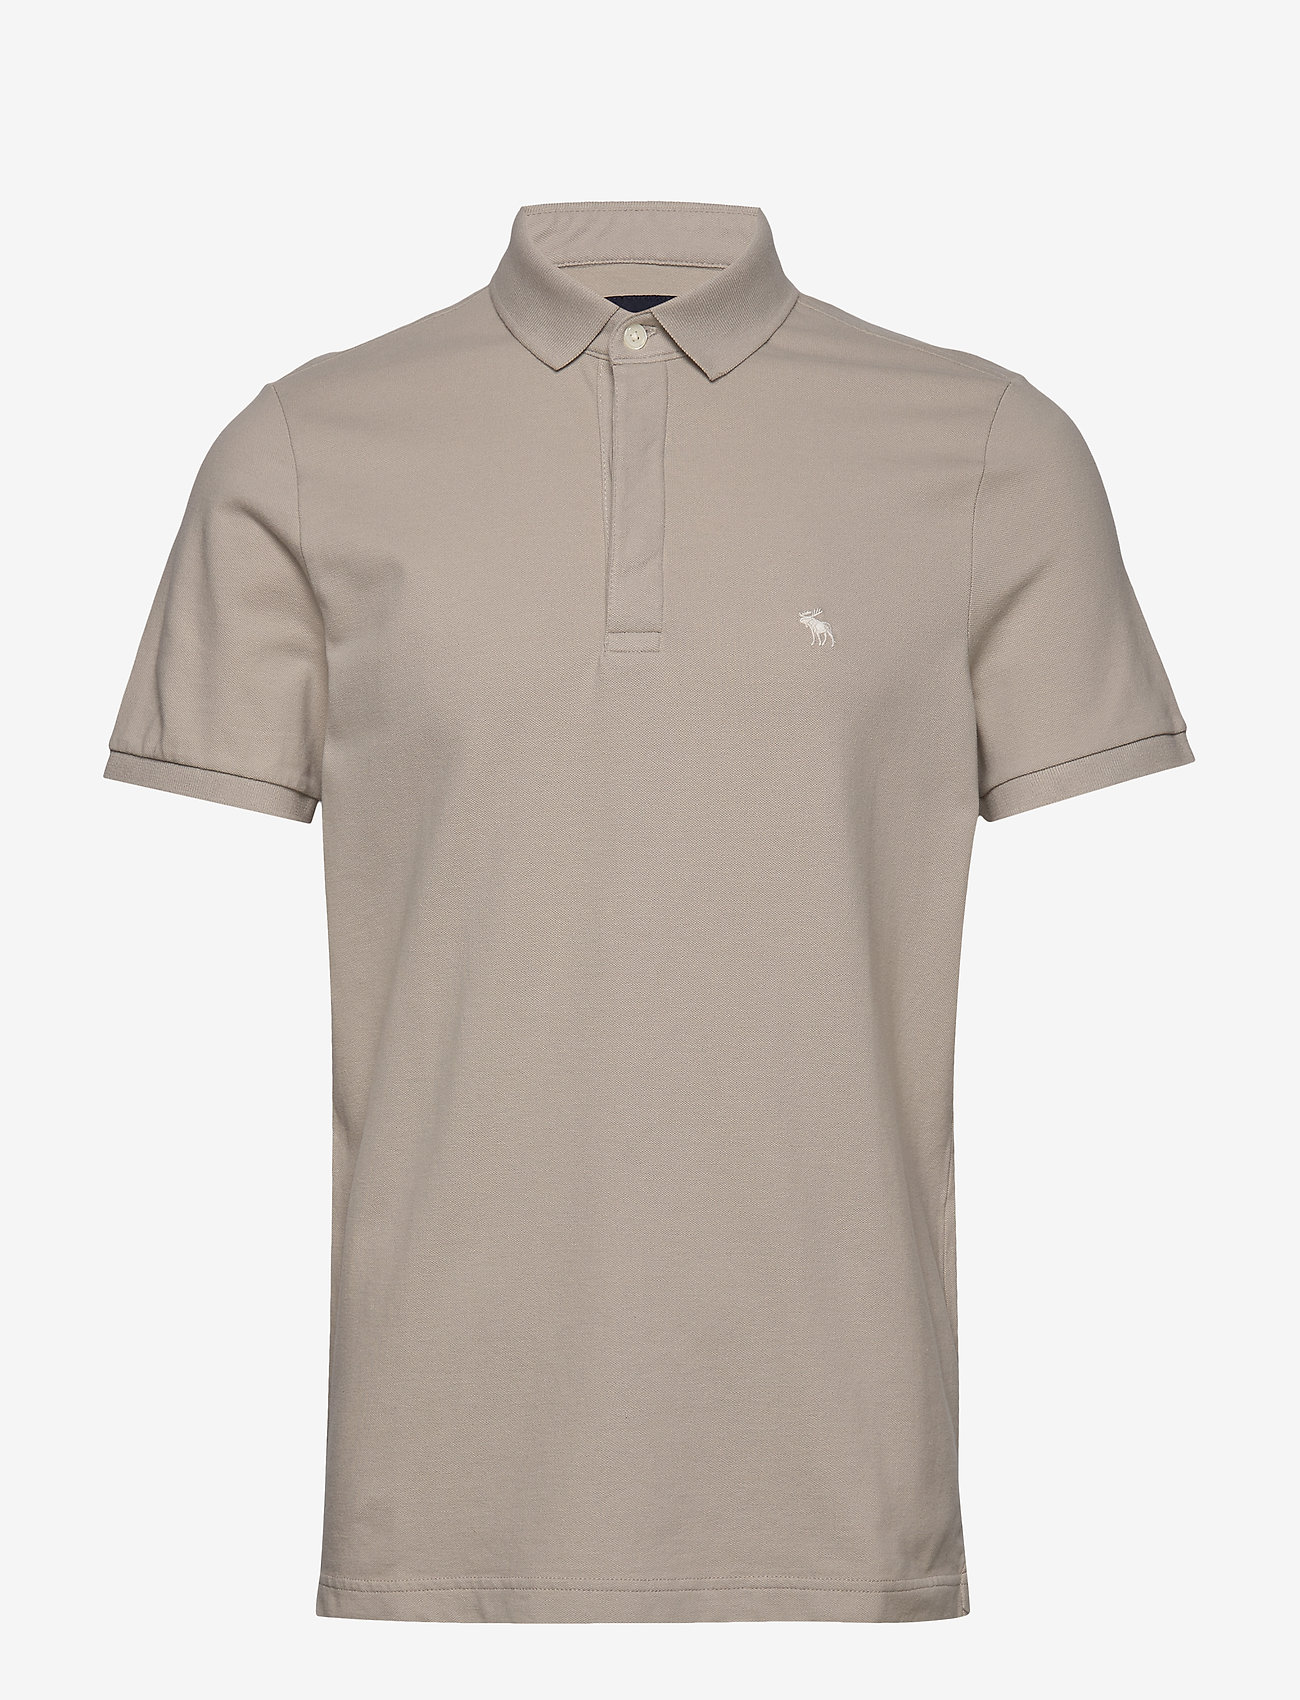 abercrombie & fitch polo